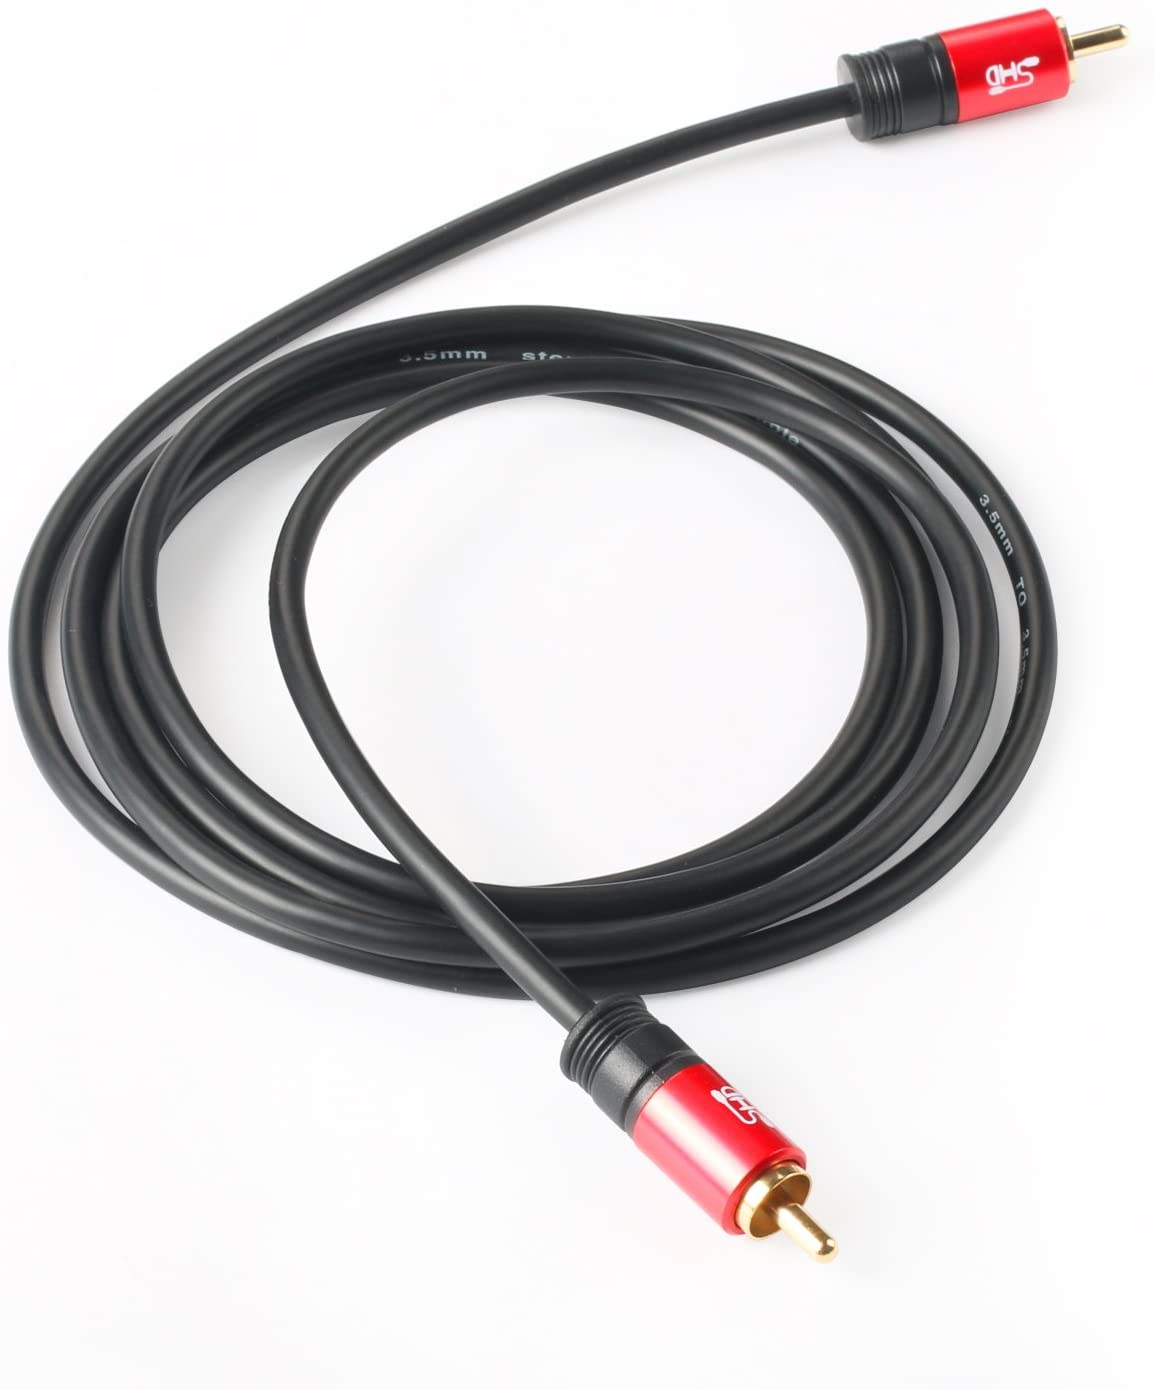 Subwoofer Cable,SHD RCA Cable RCA to RCA Audio Cable Premium Sound Quality Dual Shielded with Gold Plated Connectors-10Feet 